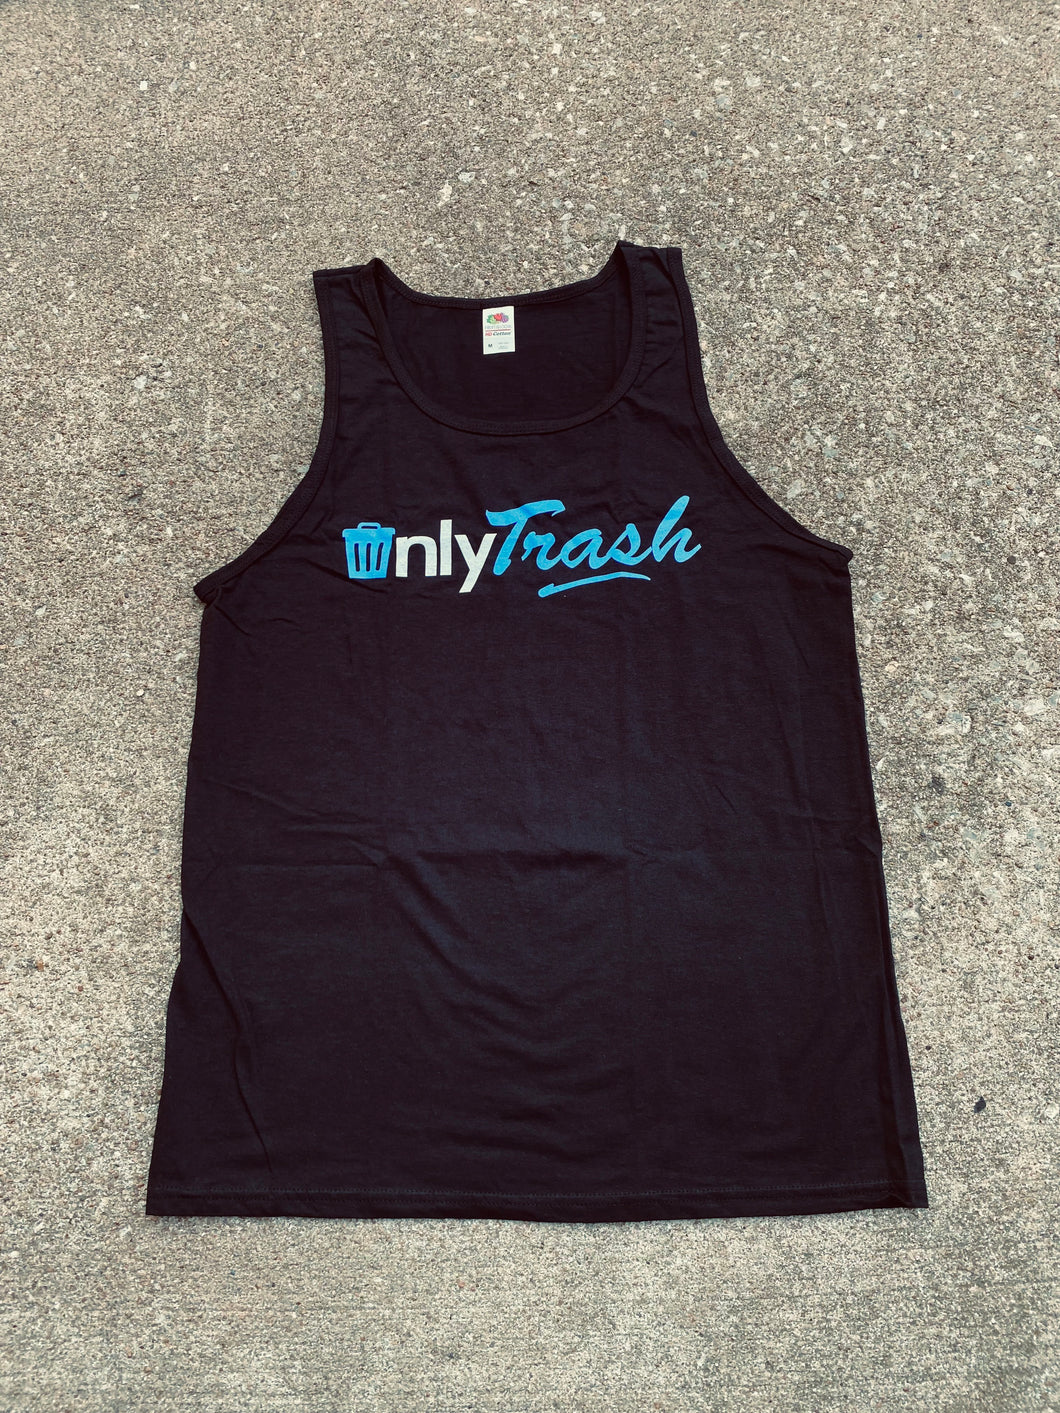 Only Trash Tank Top